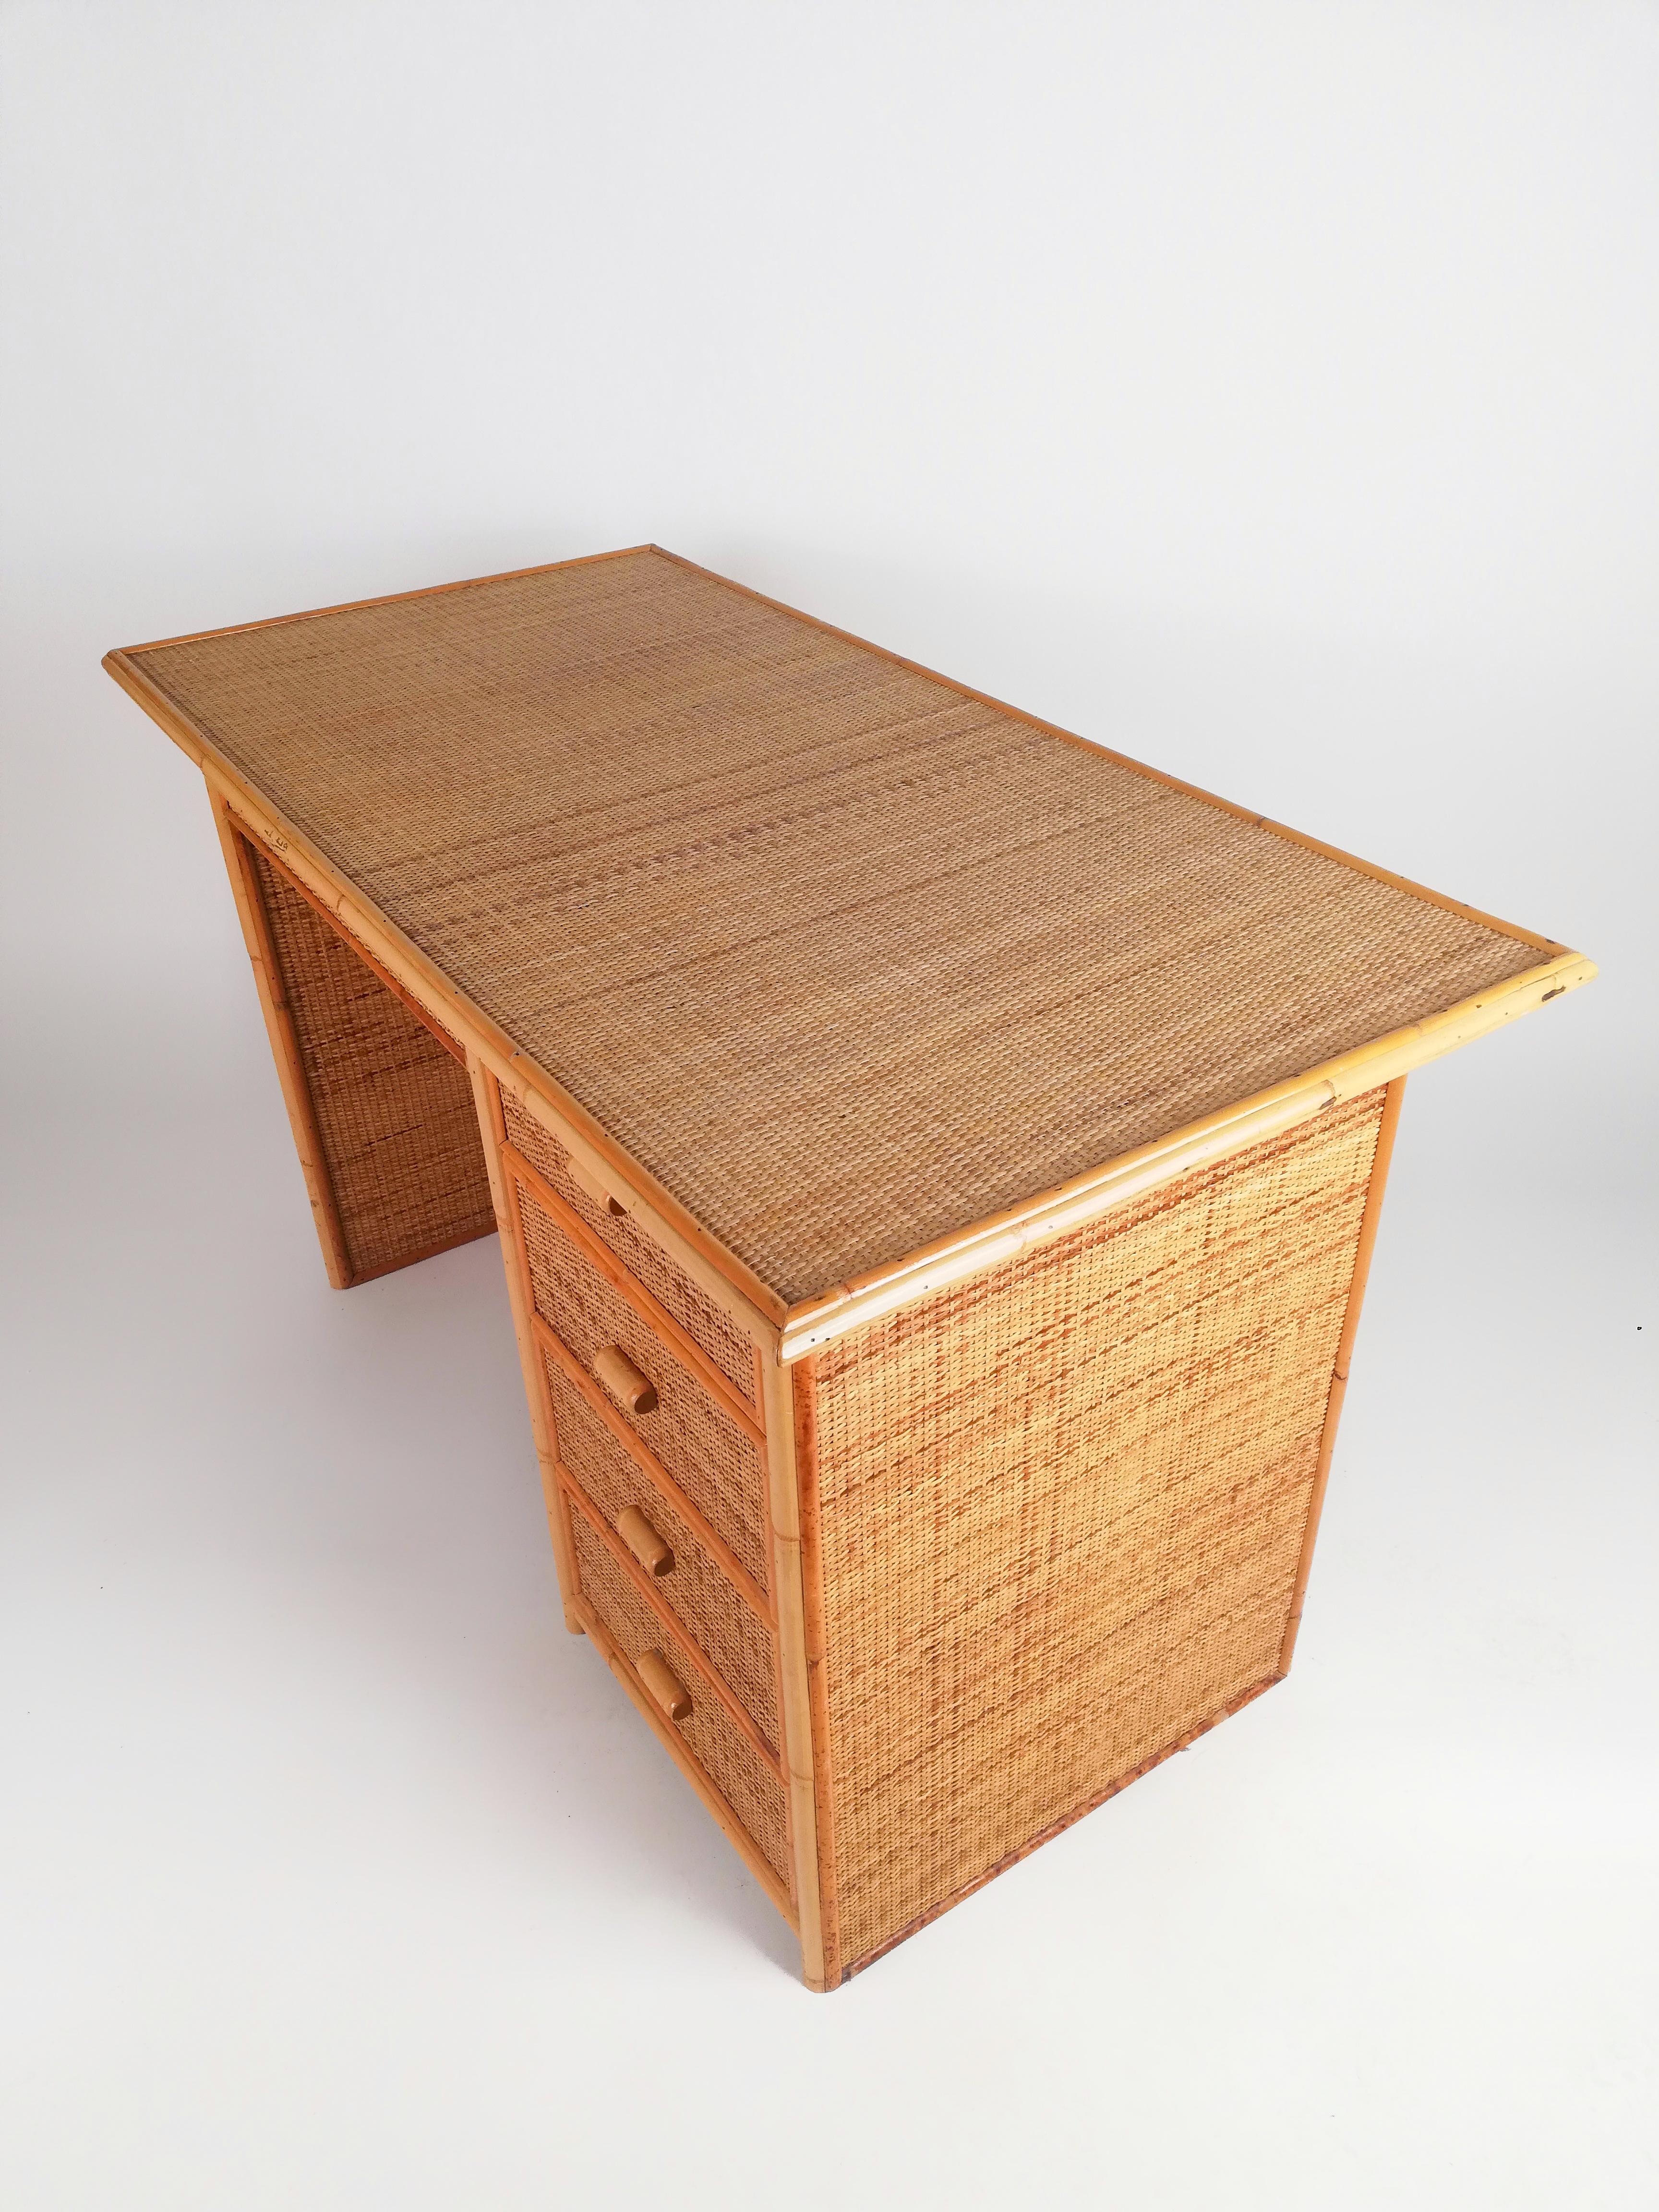 Vintage Italian Writing Desk with Drawers in Bamboo, Rattan and Plywood, 1970s For Sale 9